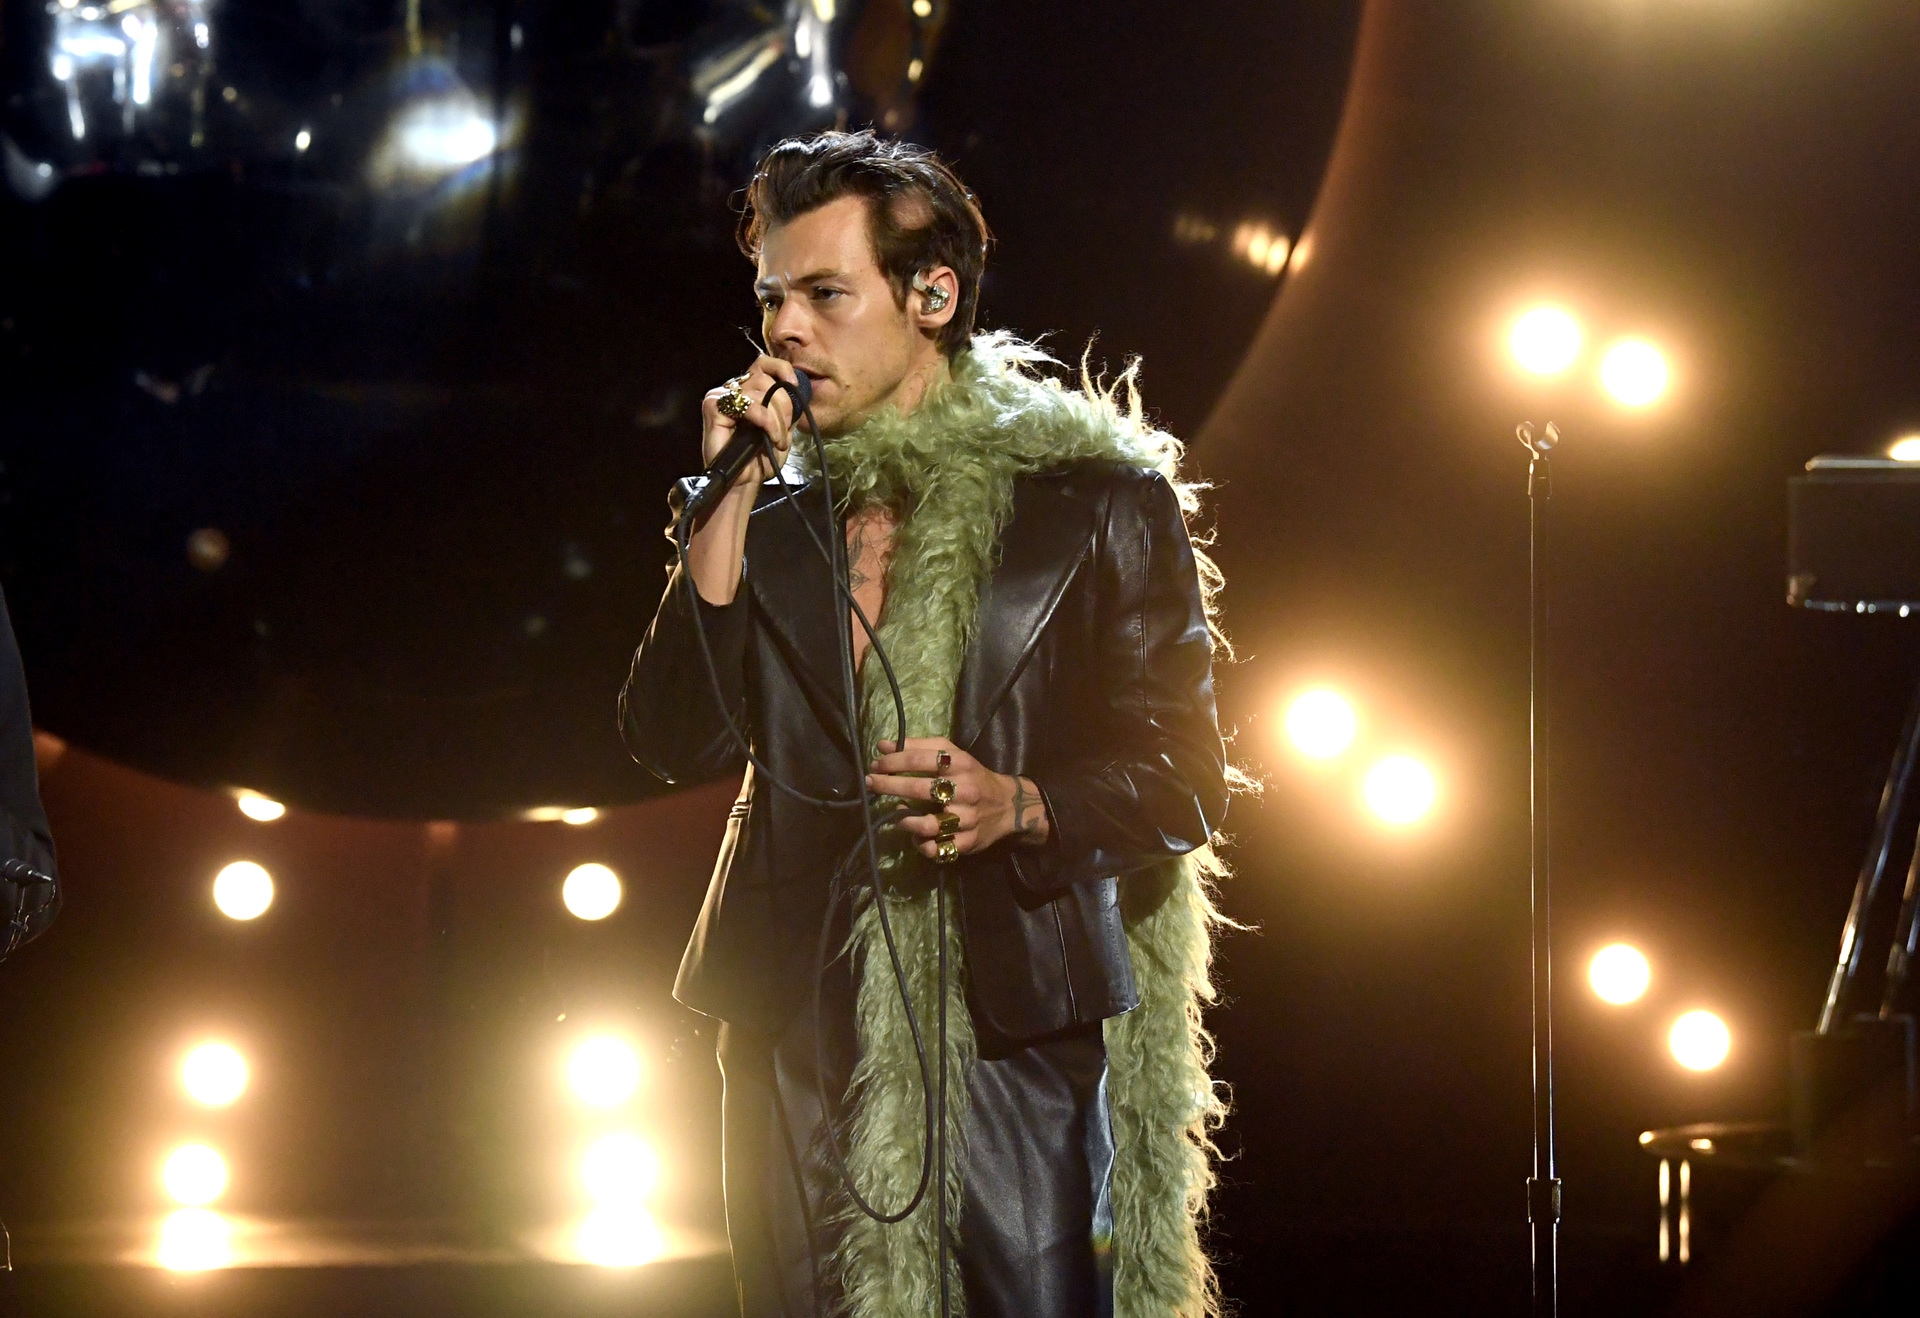 Harry Styles and his songwriting partner Kid Harpoon lead the way ahead of The Ivors with three nominations each.